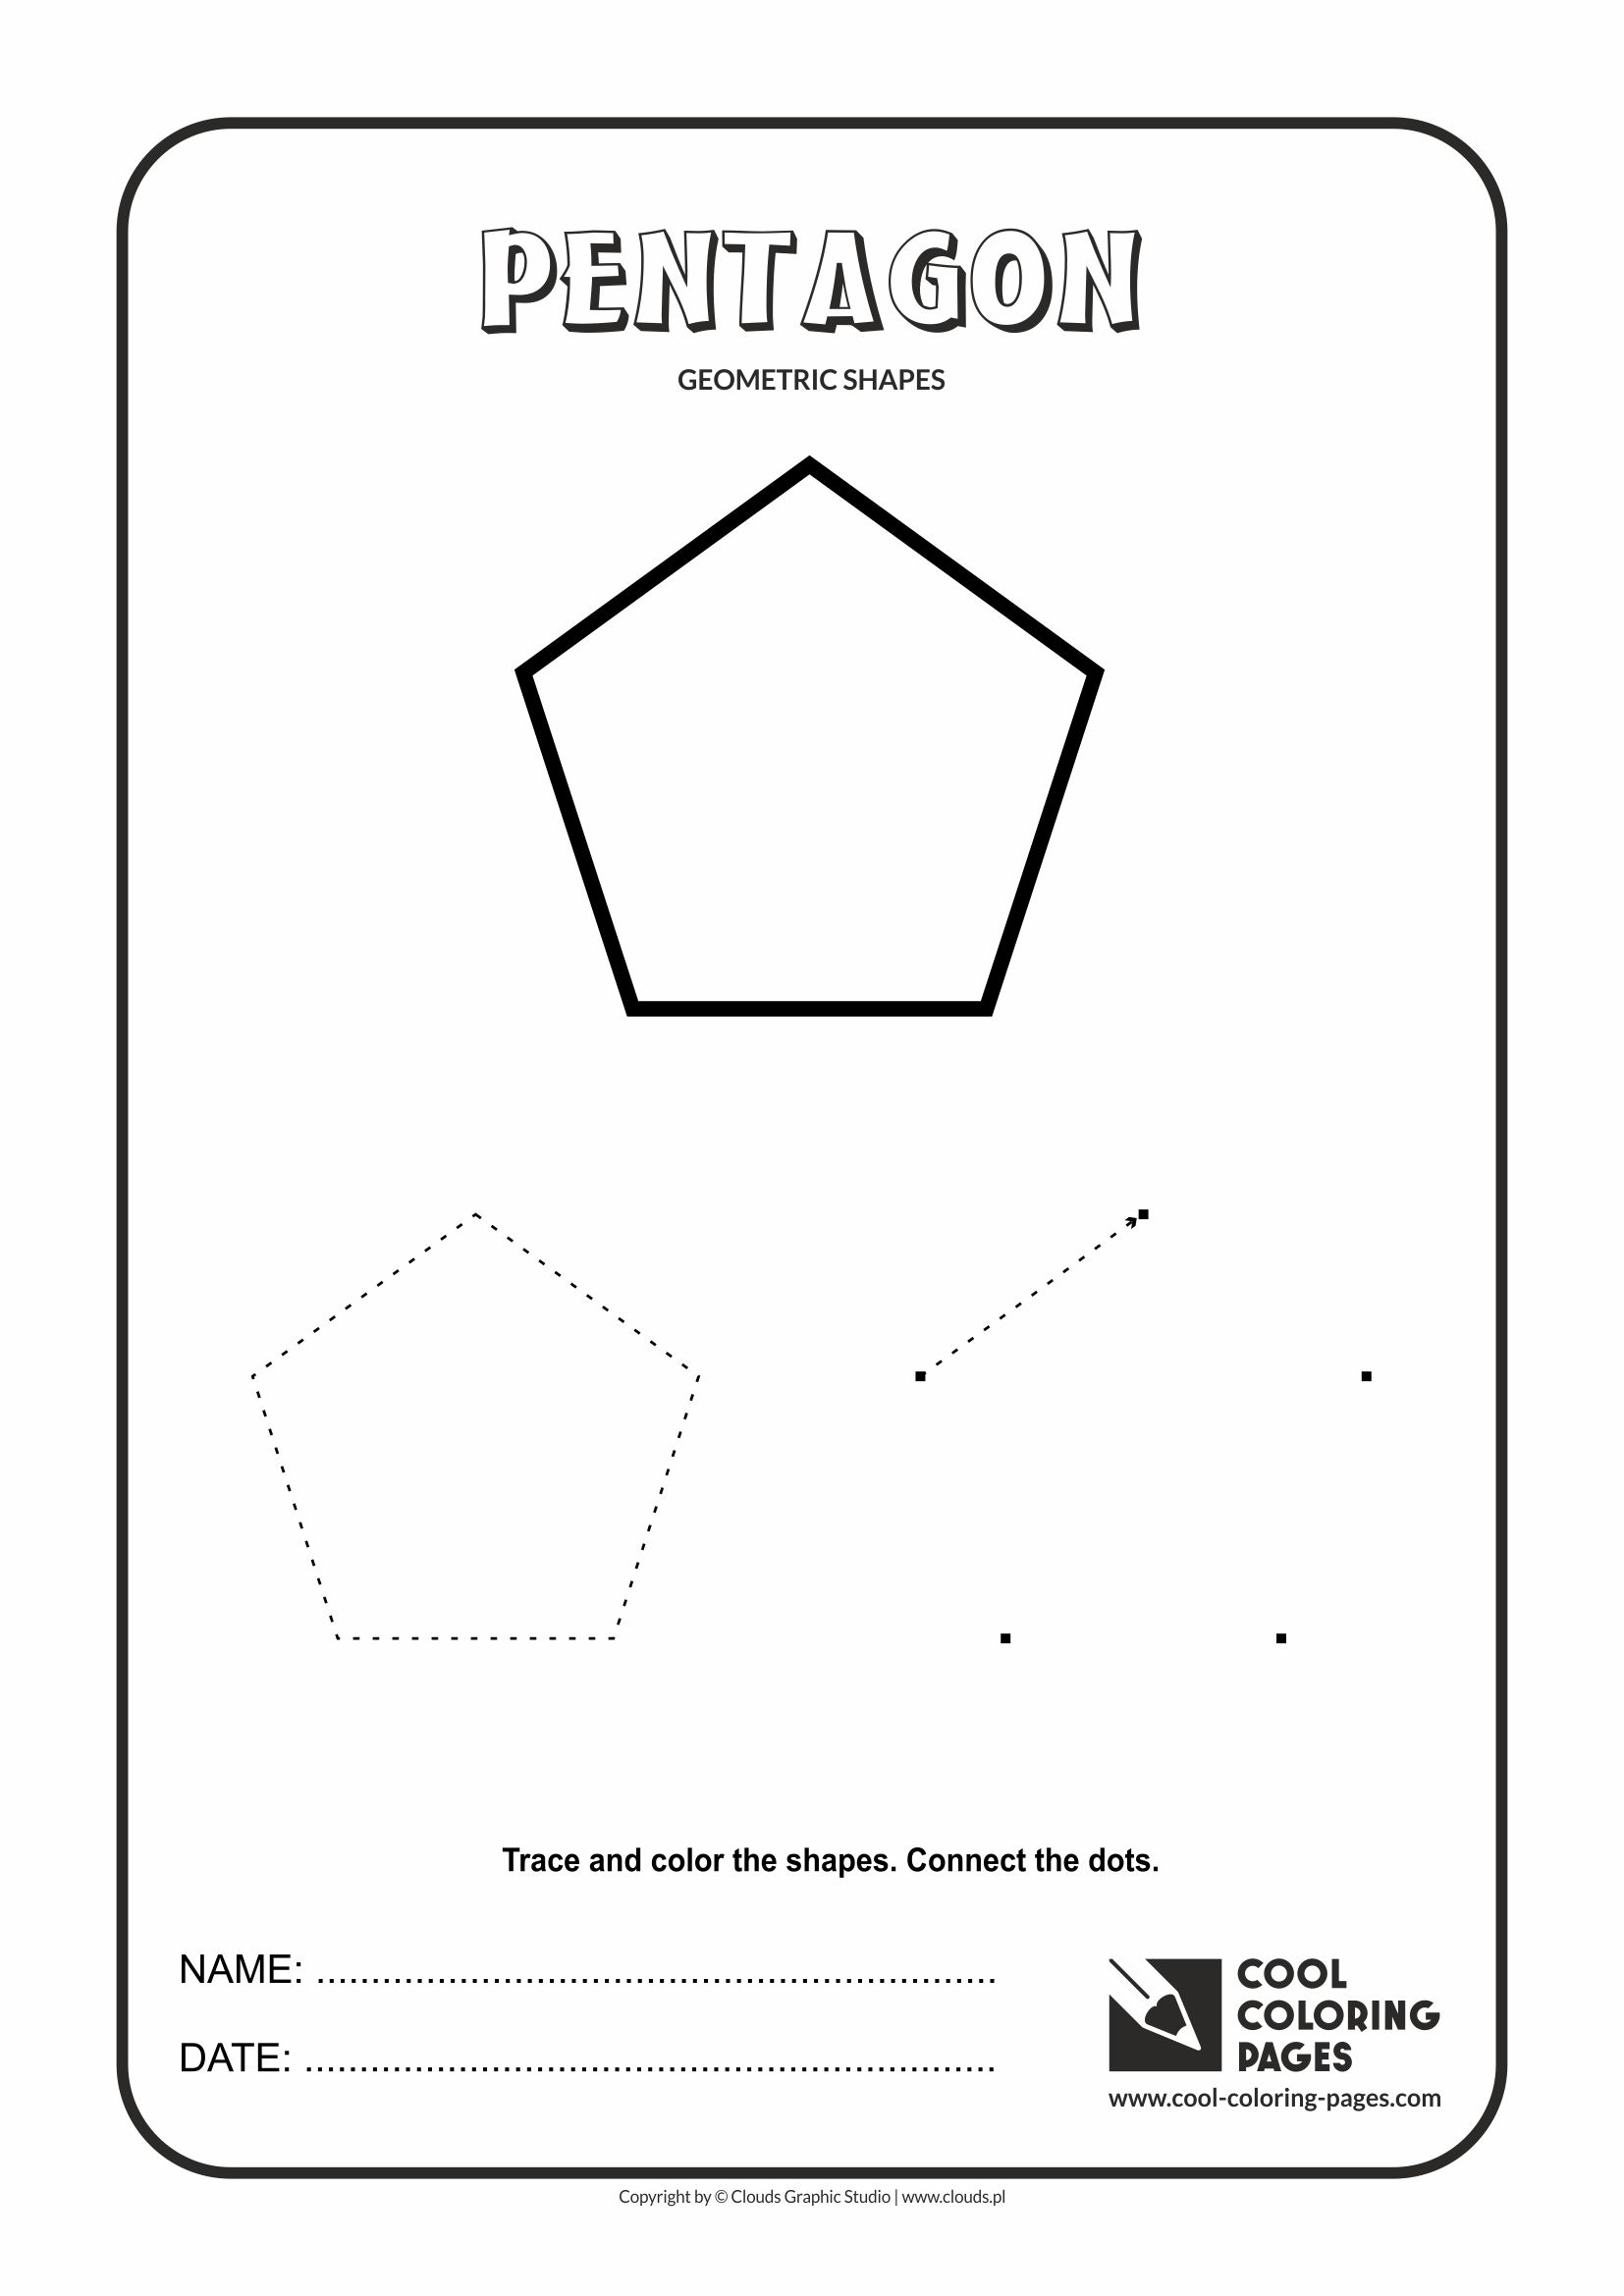 Cool Coloring Pages - Geometric shapes / Pentagon